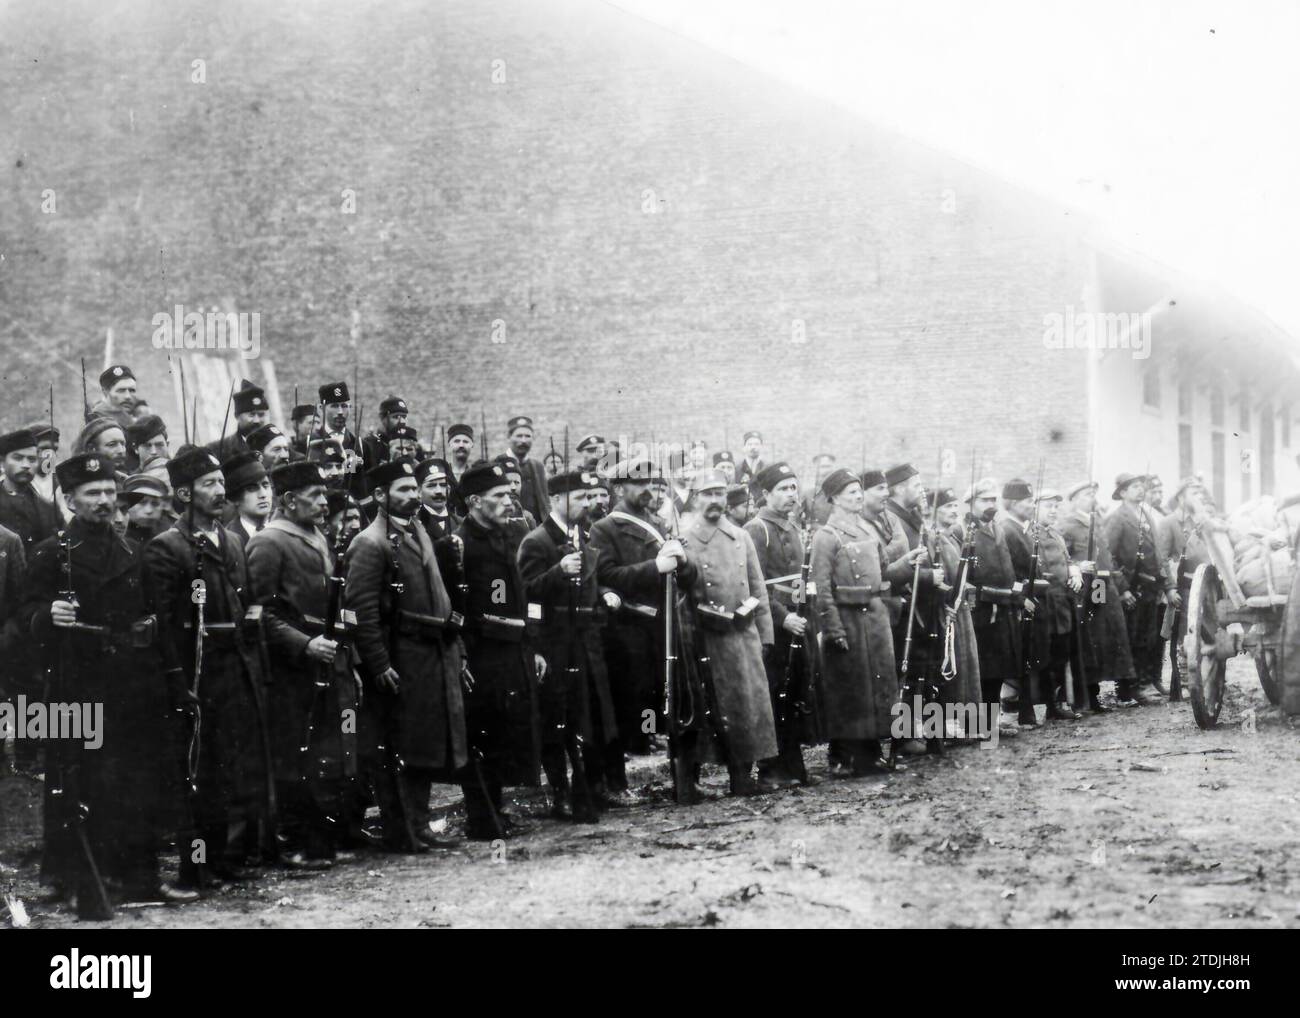 09/30/1912. The Eastern War. Bulgarian Army Reservists Reviewing in Sofia. Credit: Album / Archivo ABC / Argus Stock Photo